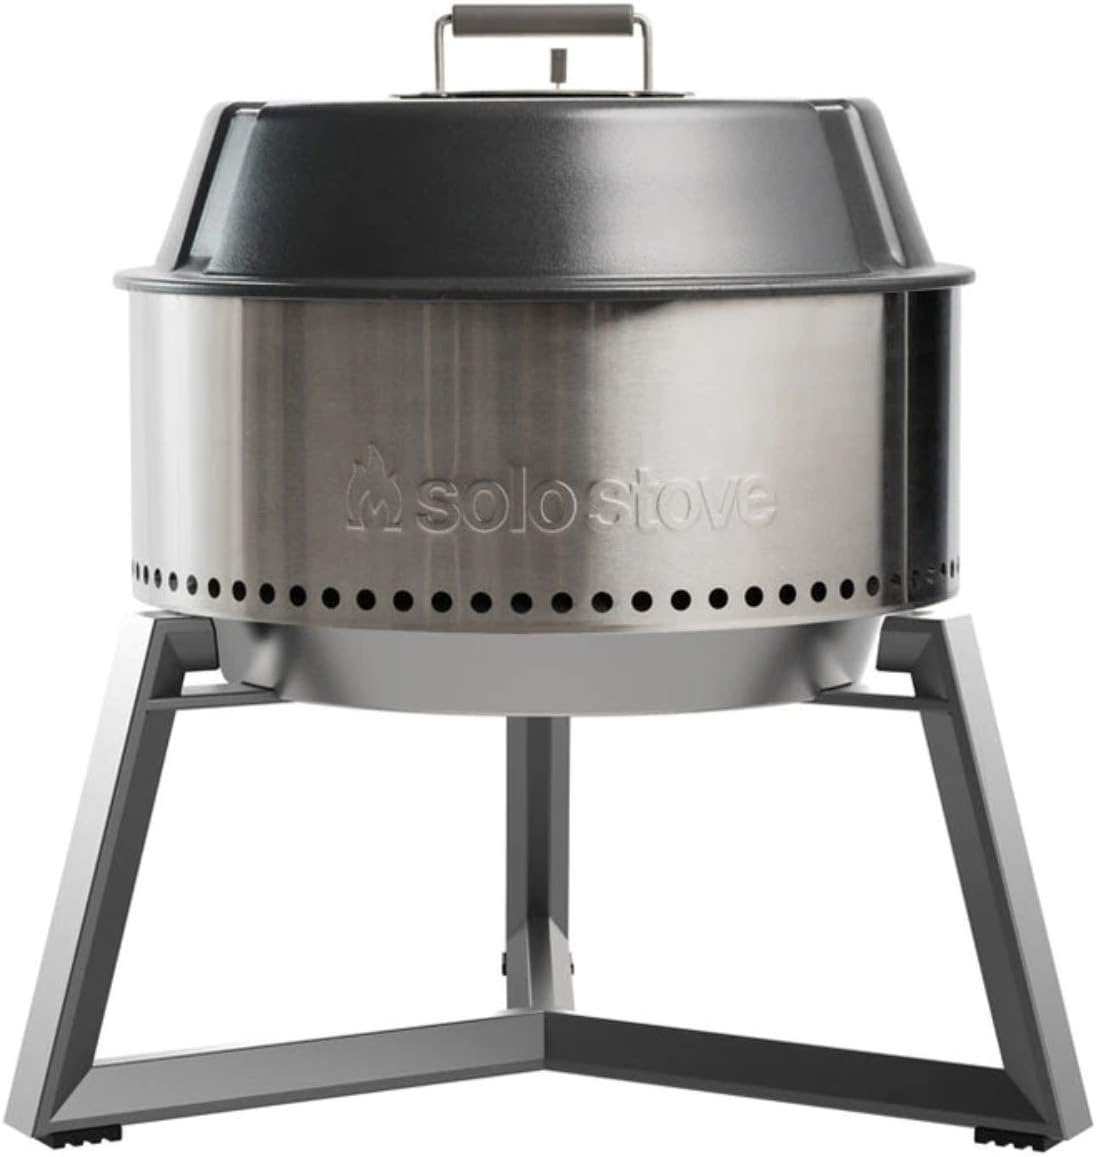 Solo Stove Modern Grill Ultimate Bundle w/ Accessories (ULT-SSGRILL-22) $185 + Free Shipping w/ Prime $184.99